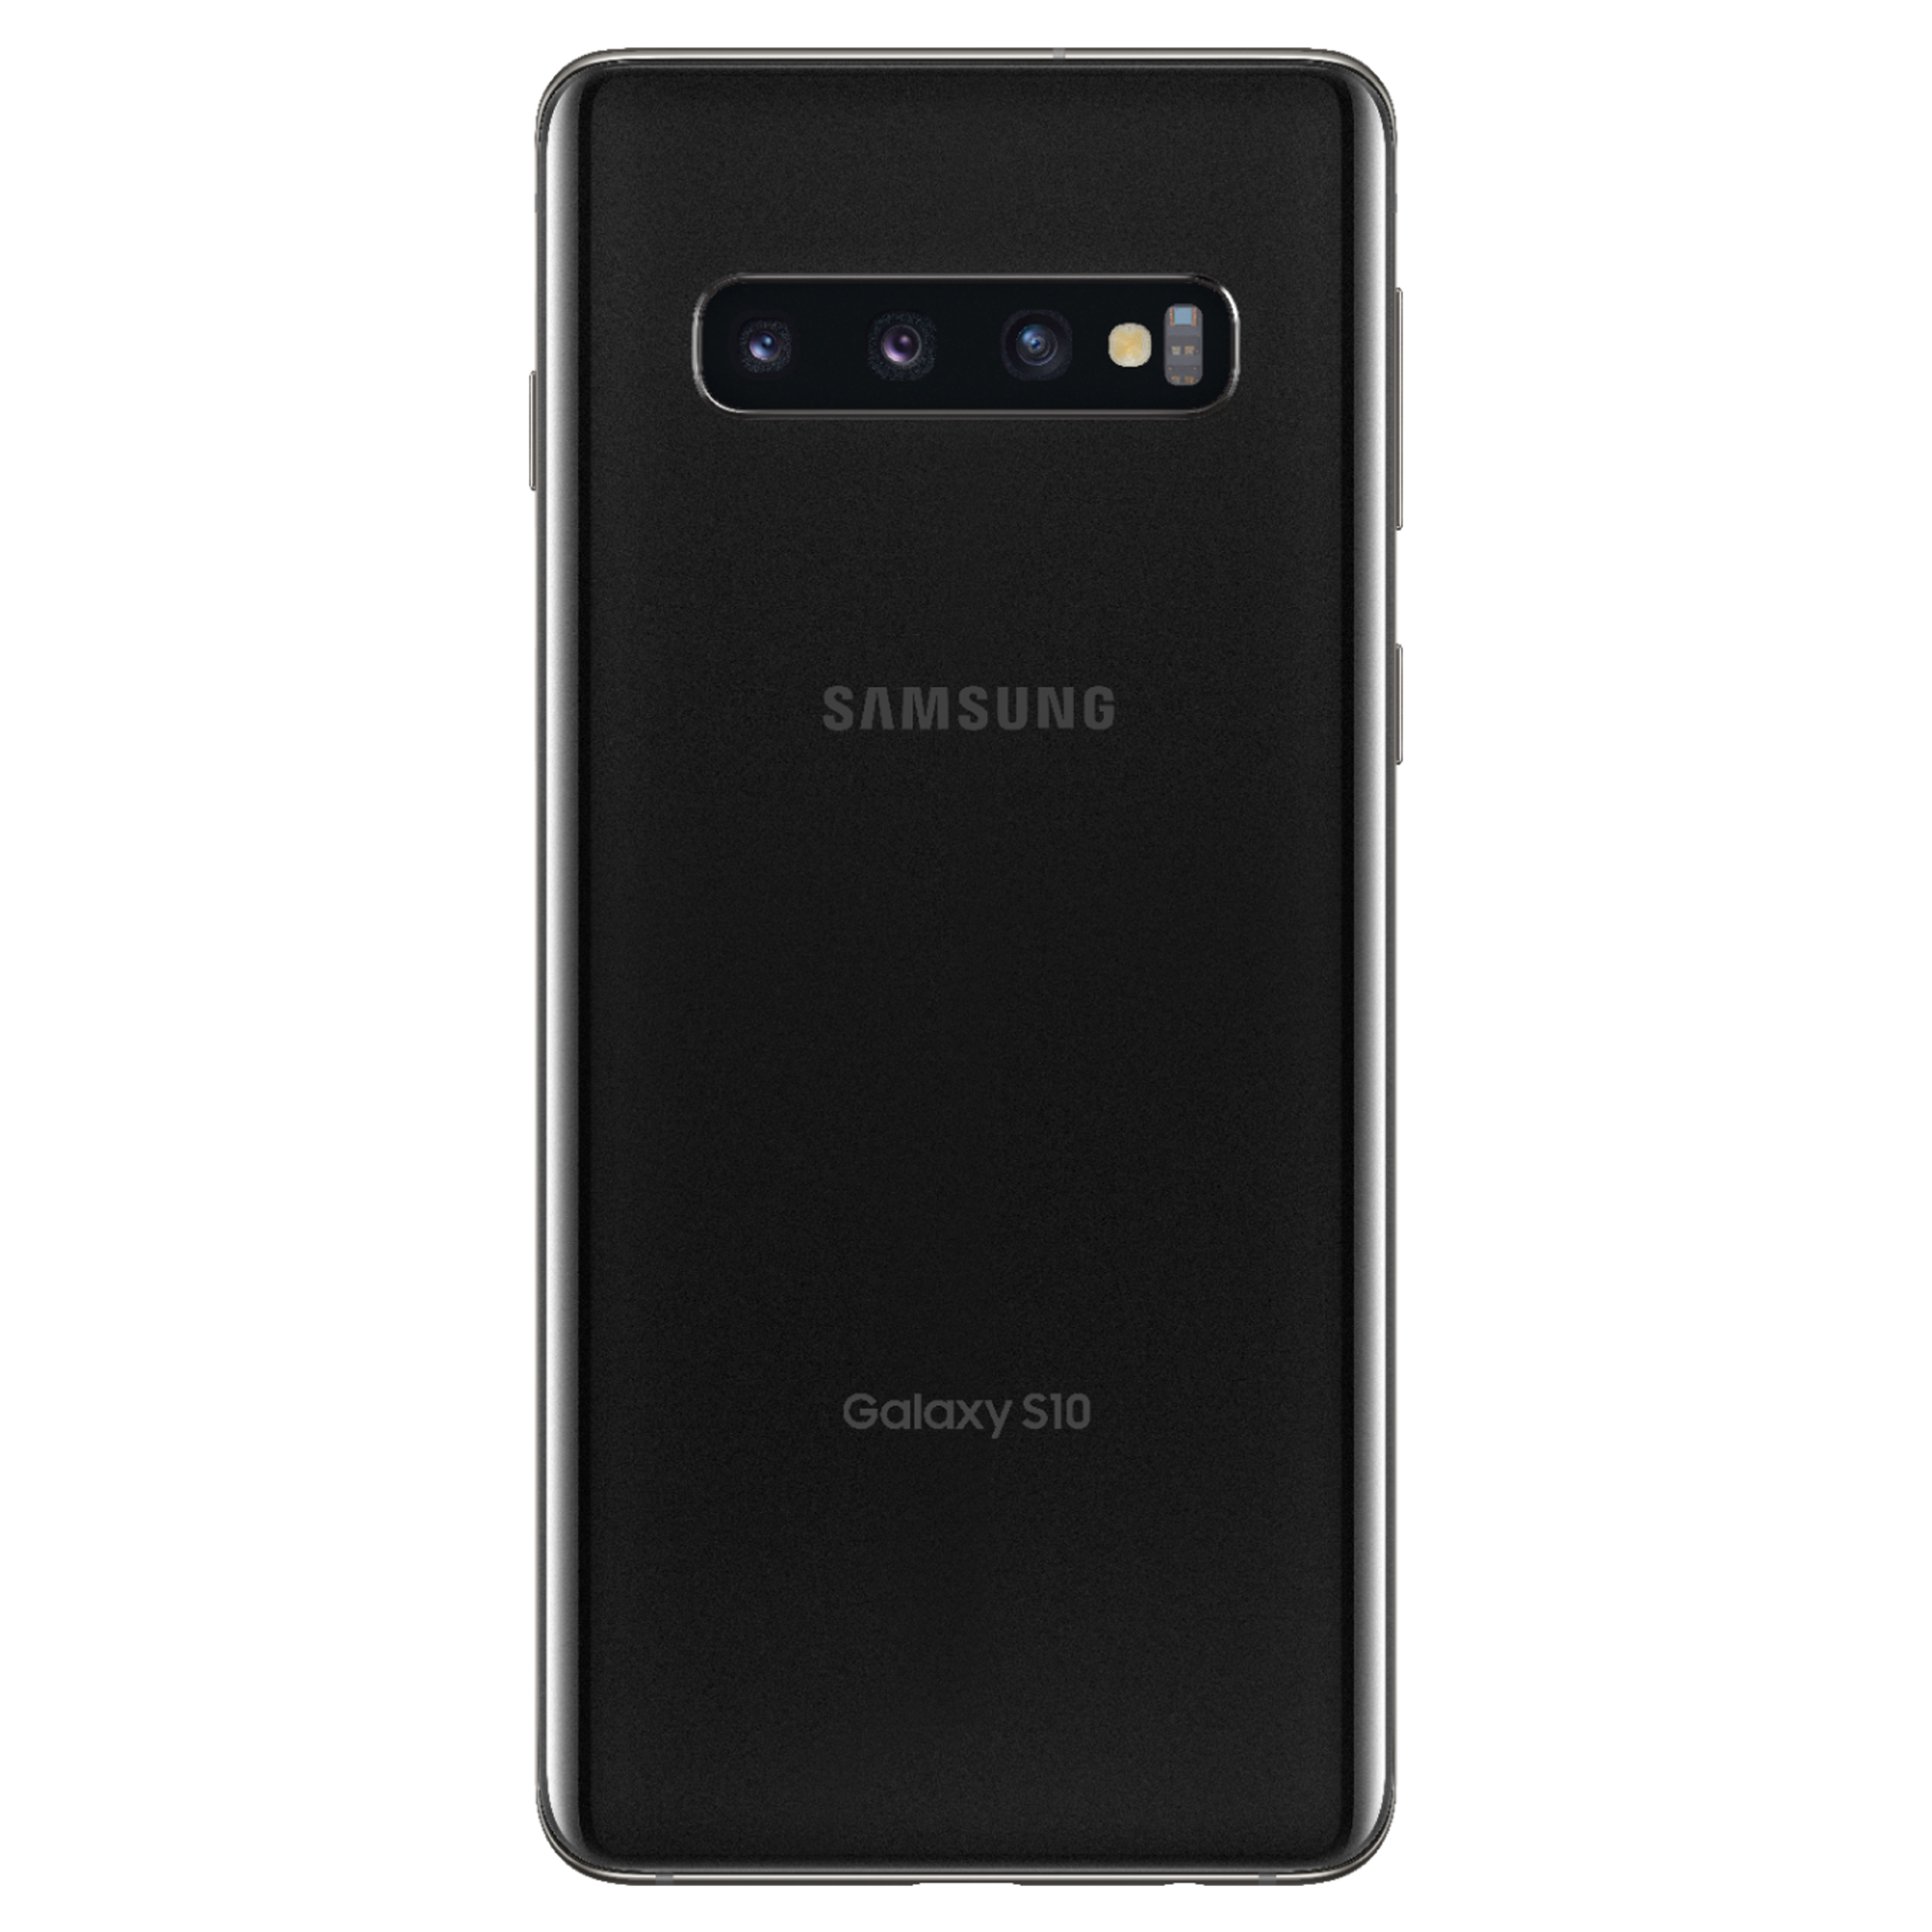 Restored SAMSUNG G973 Galaxy S10, 128 GB, Prism Black - Fully Unlocked - GSM and CDMA Compatible (Refurbished) - image 3 of 7